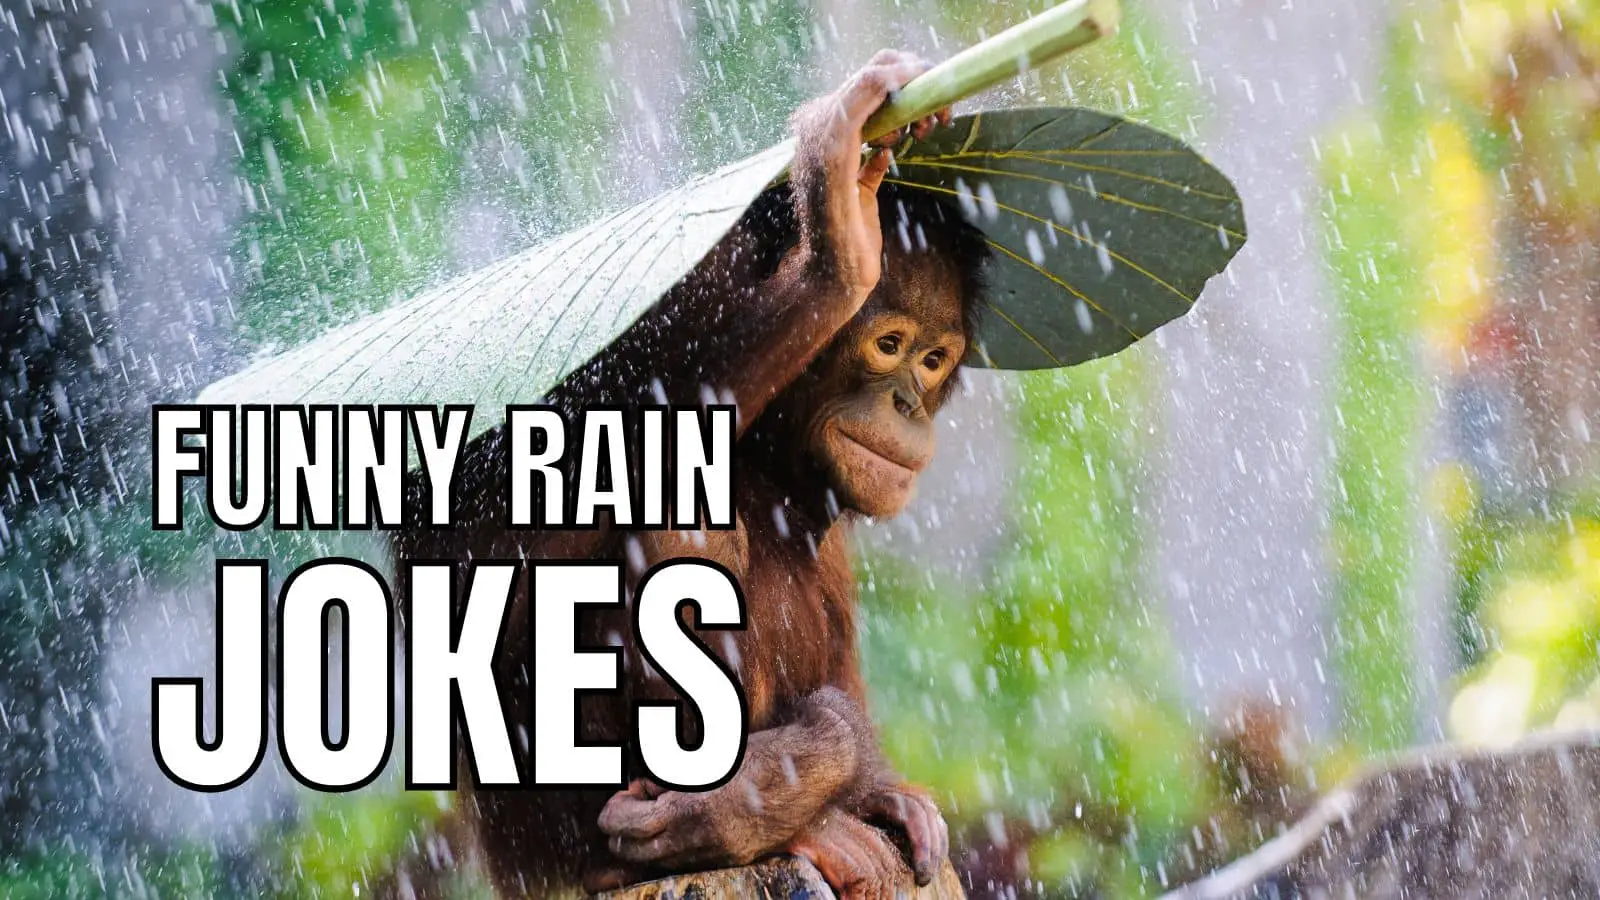 Rain Jokes For Kids and Adults